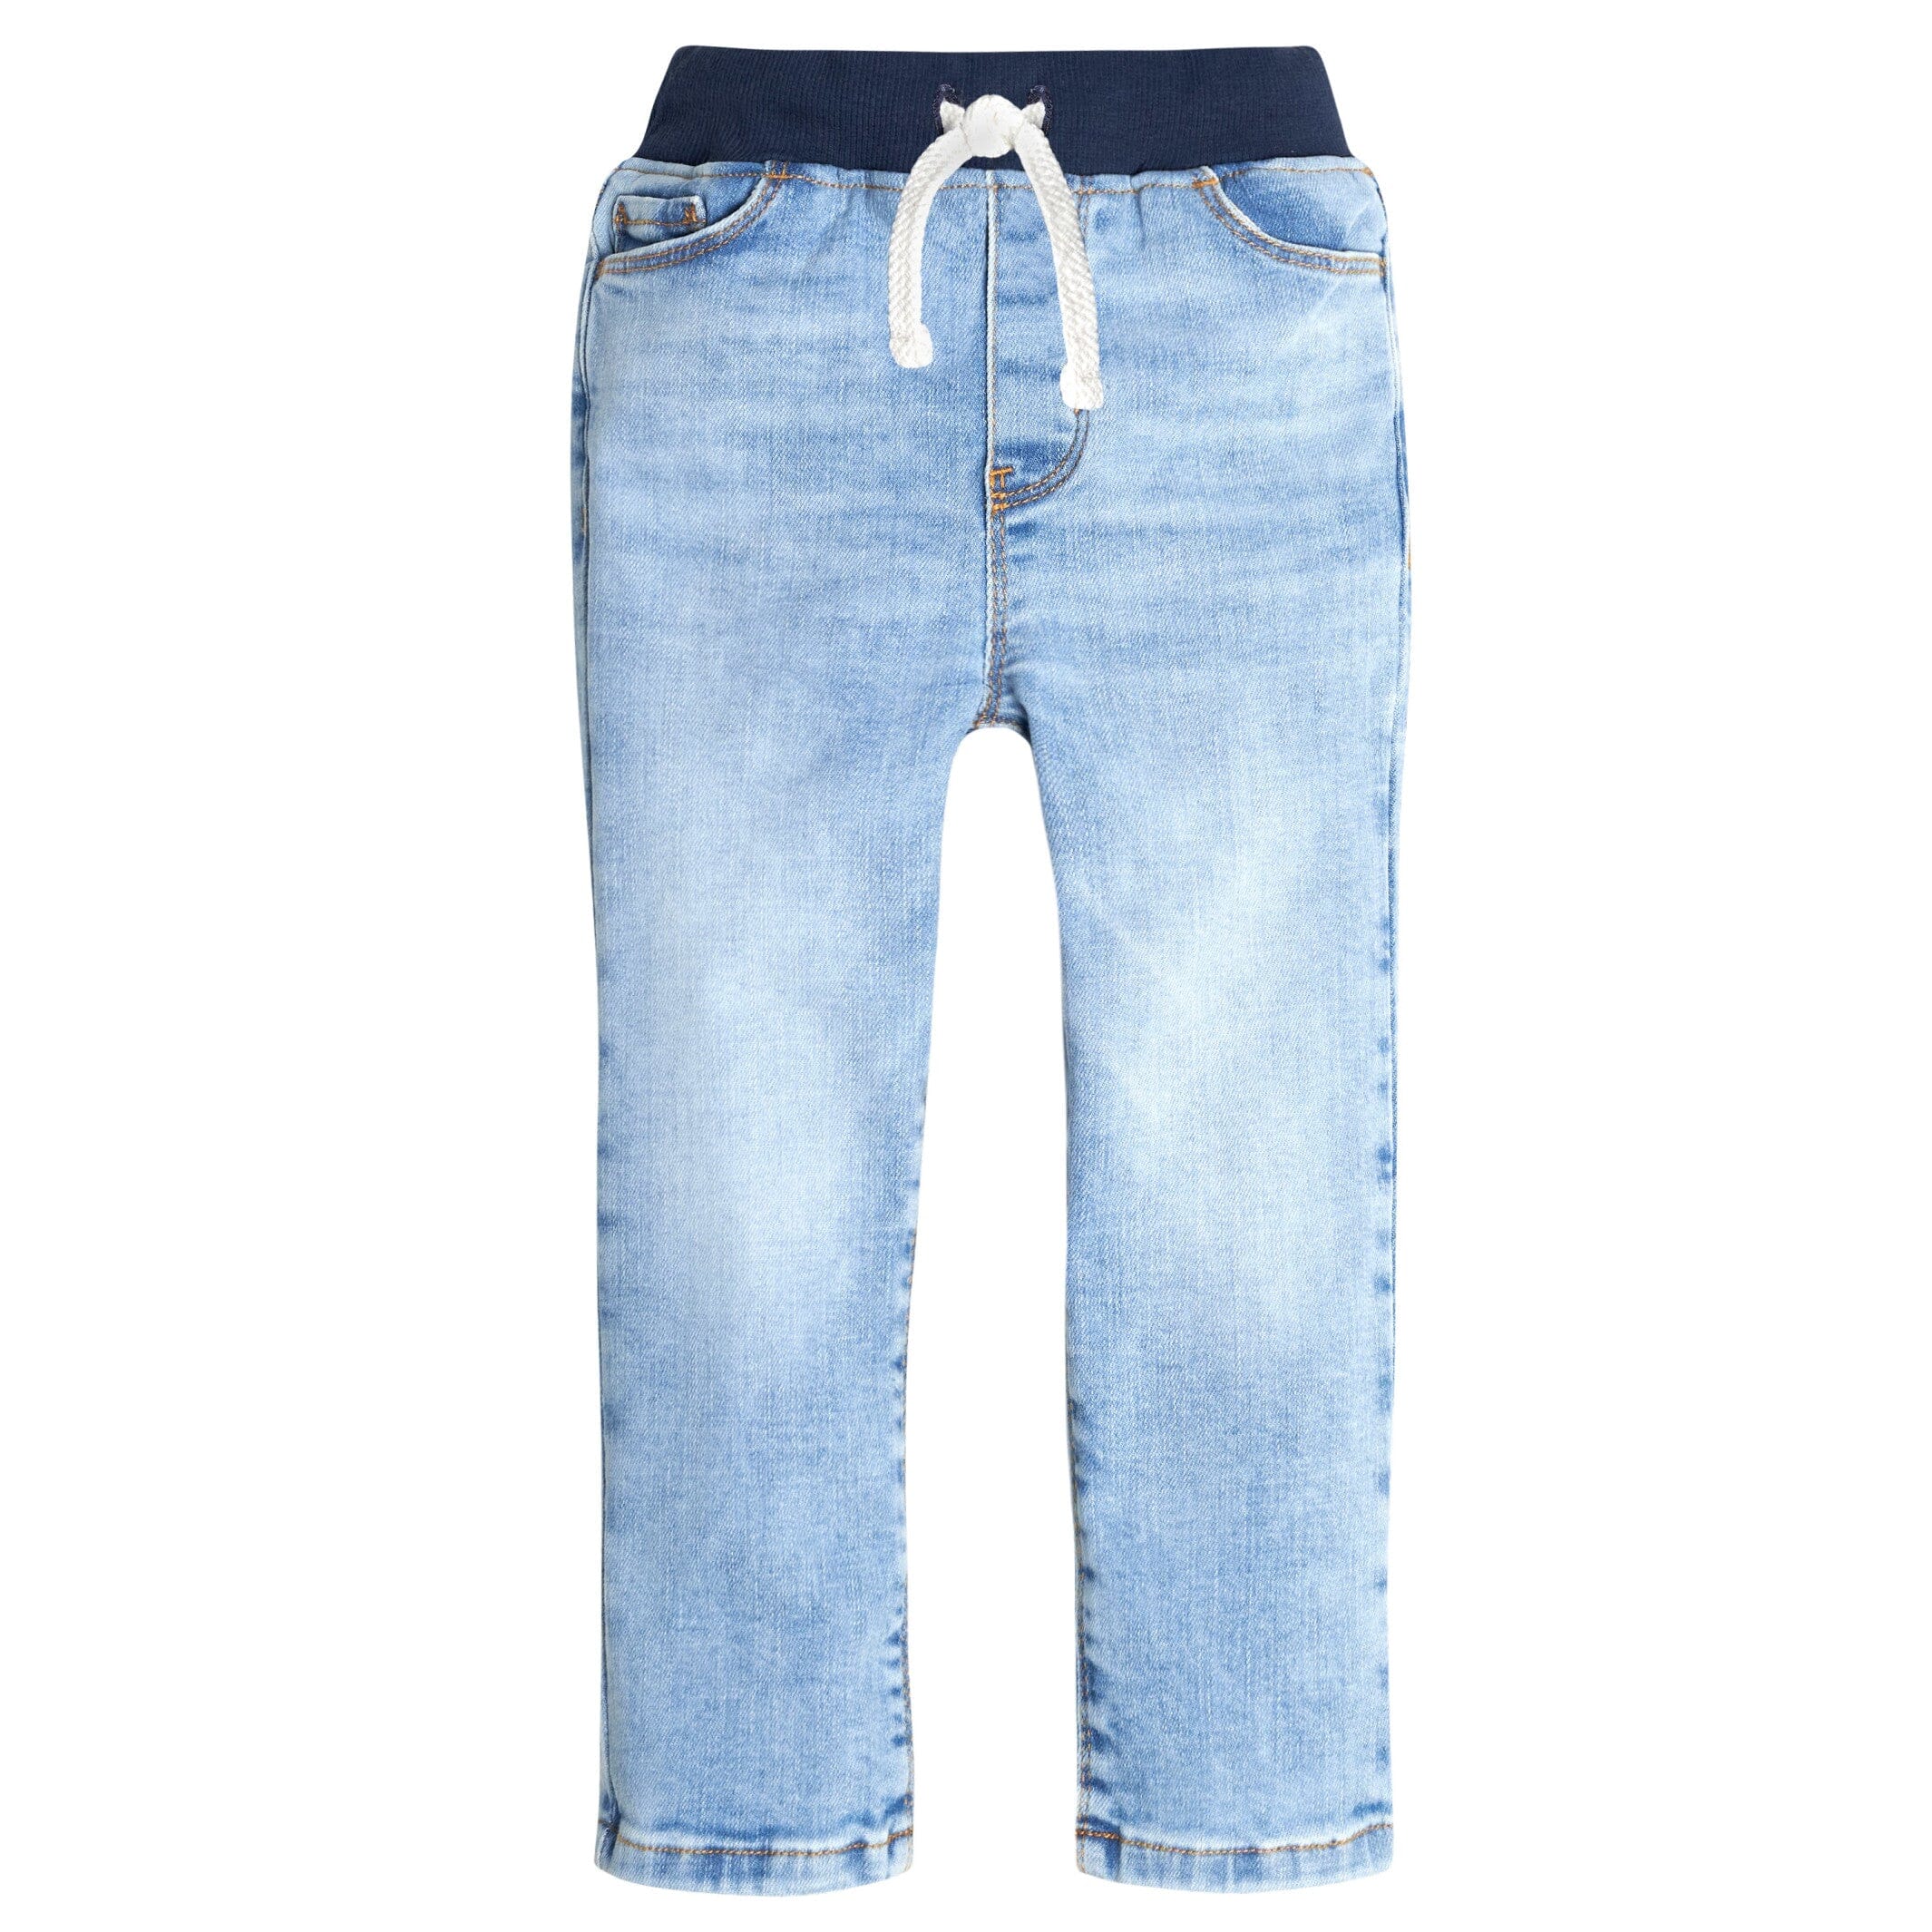 Women's Relaxed Fit Stone Wash Stretch Jeans